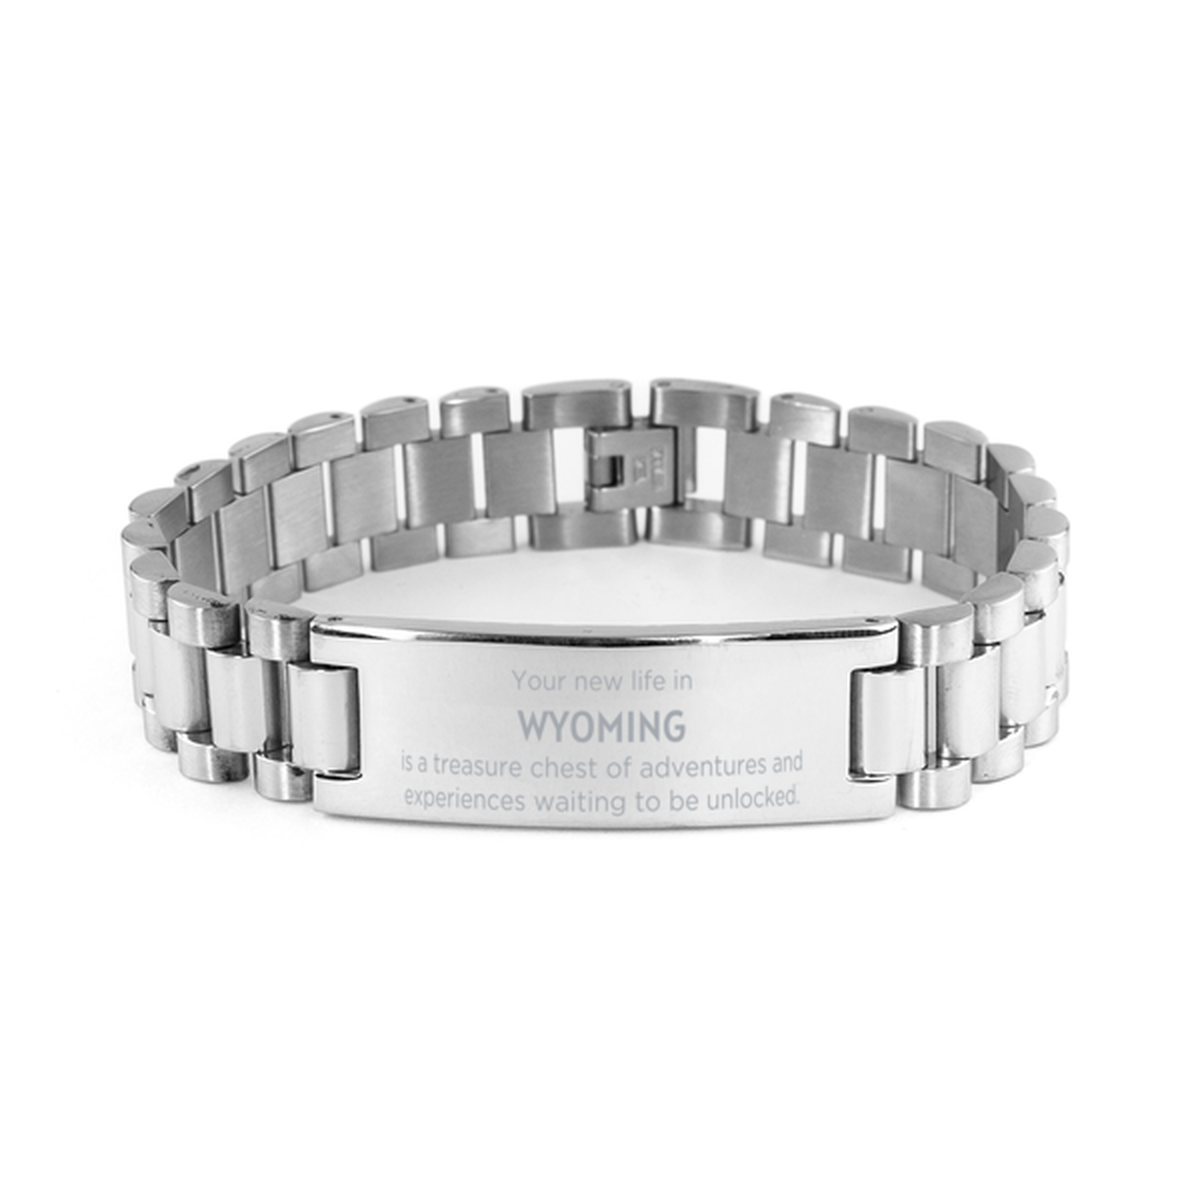 Moving to Wyoming Gifts, Your new life in Wyoming, Long Distance Wyoming Christmas Ladder Stainless Steel Bracelet For Men, Women, Friends, Coworkers